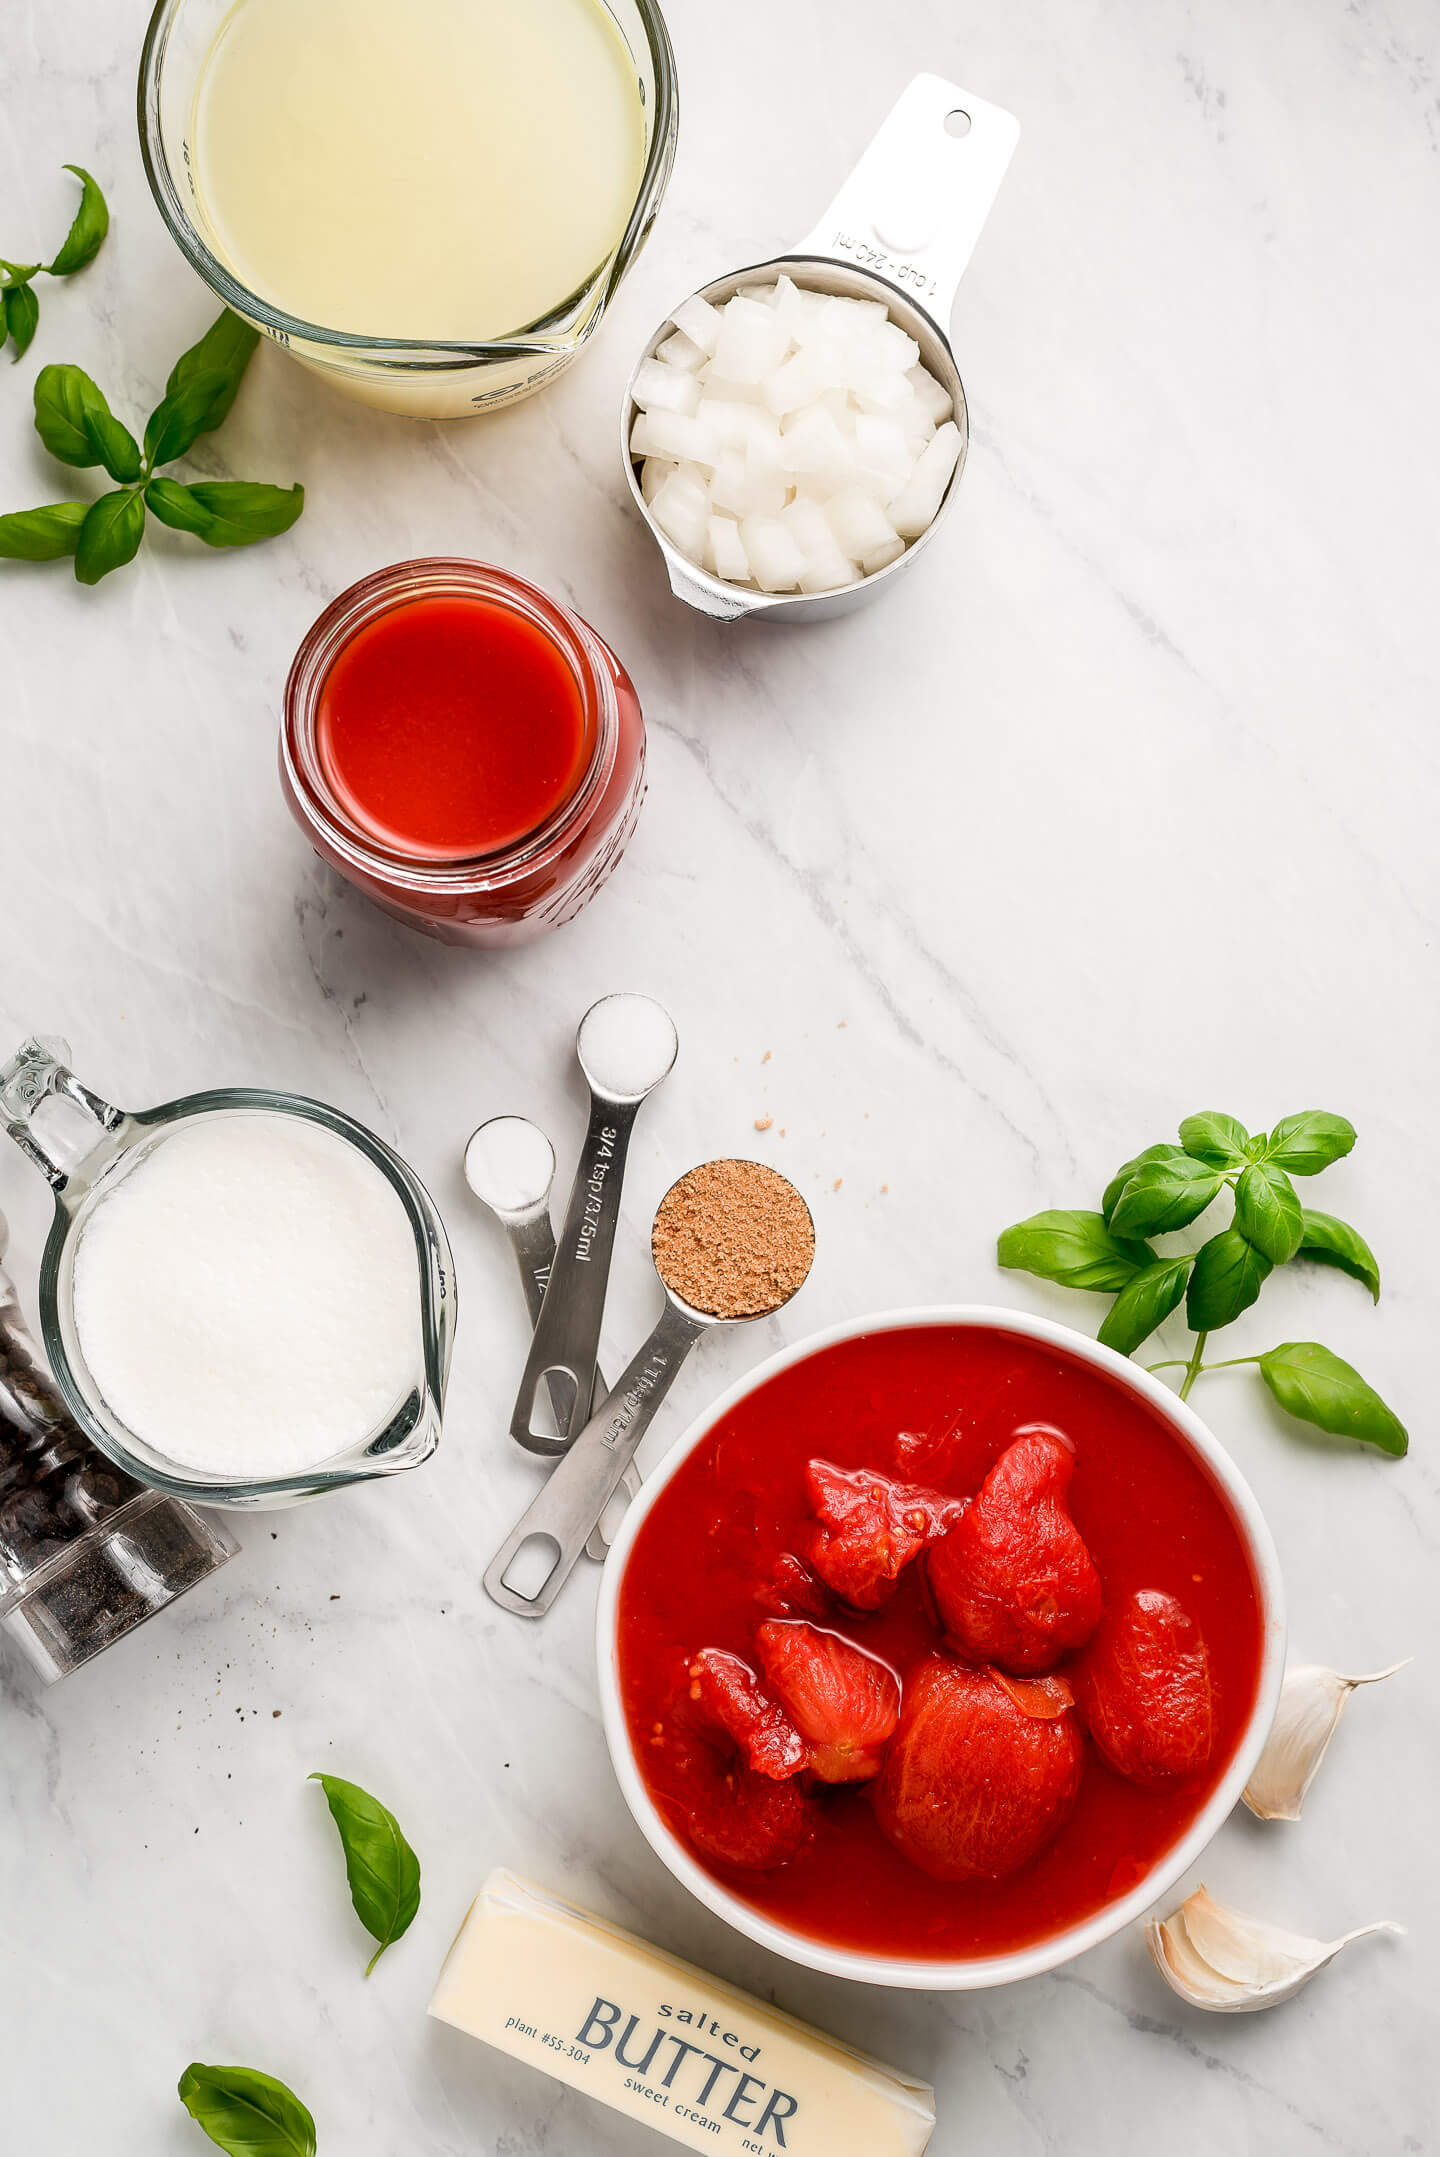 Ingredients on a marble surface- chicken broth, onions, tomato sauce, cream, whole peeled tomatoes, butter, garlic, and basil.